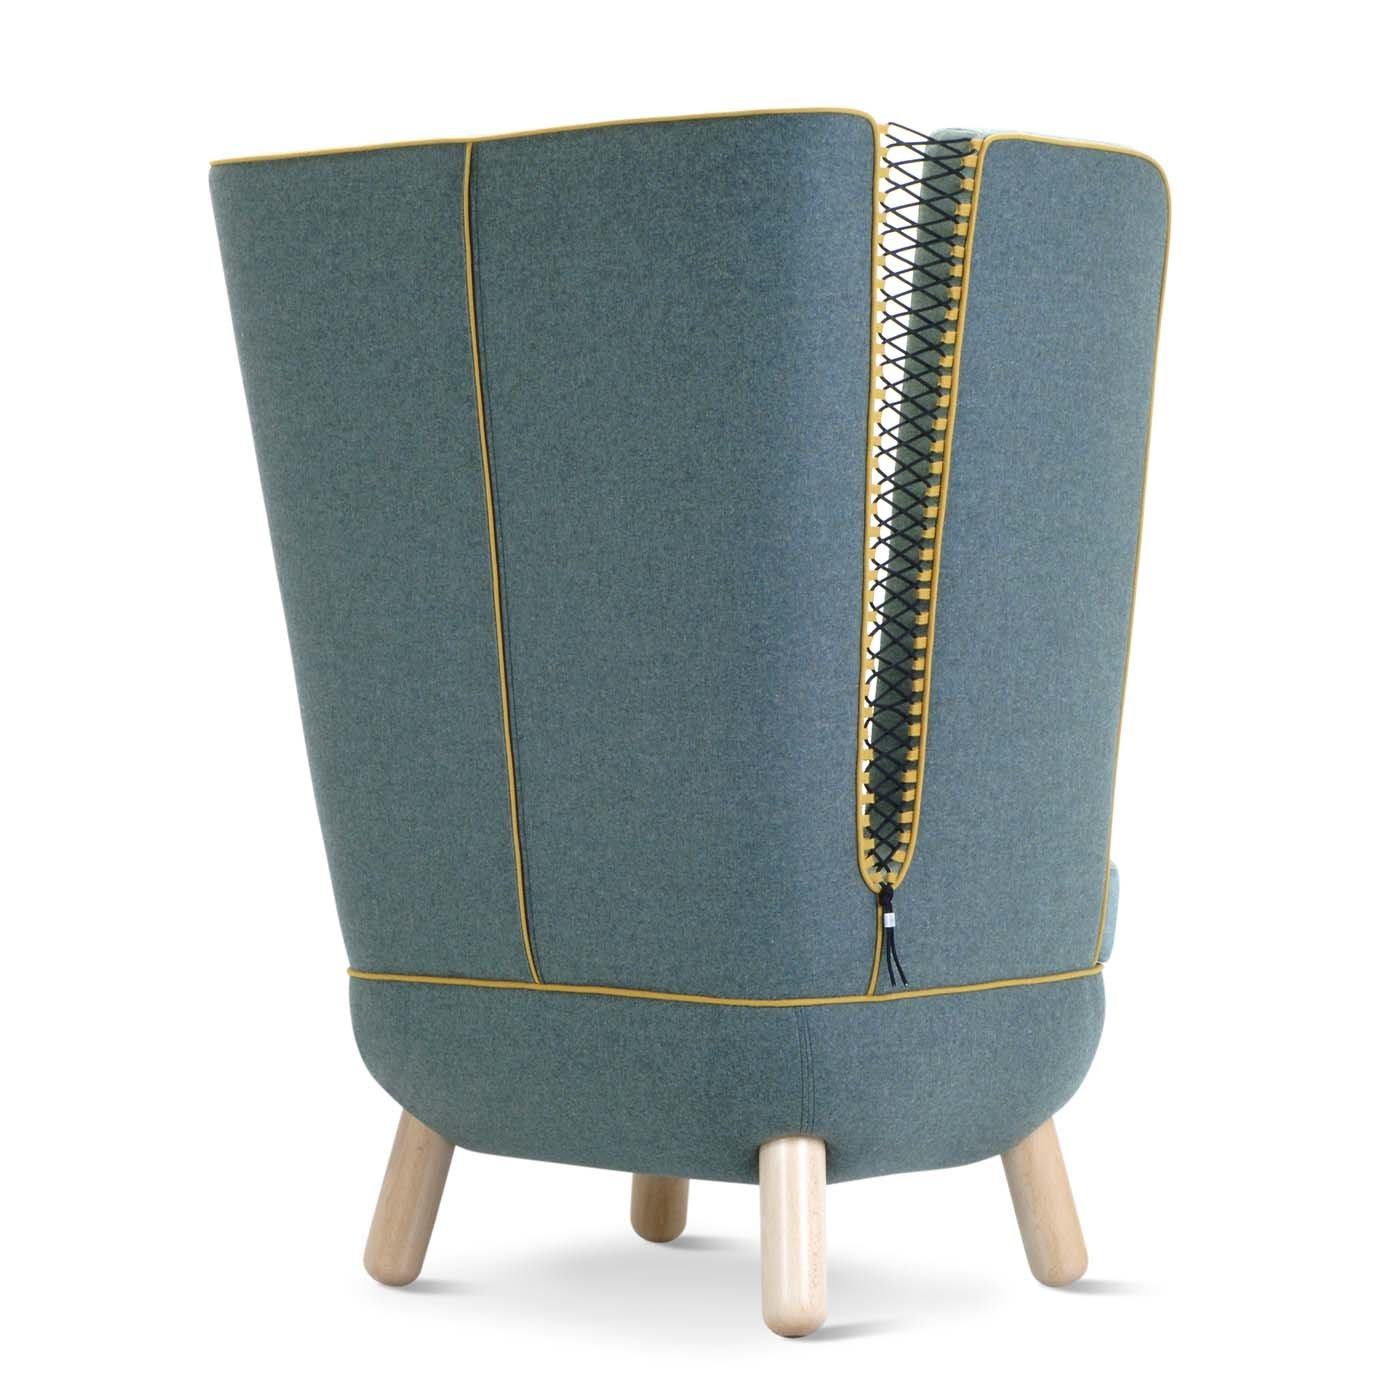 Sly High Armchair By Italo Pertichini - Alternative view 3